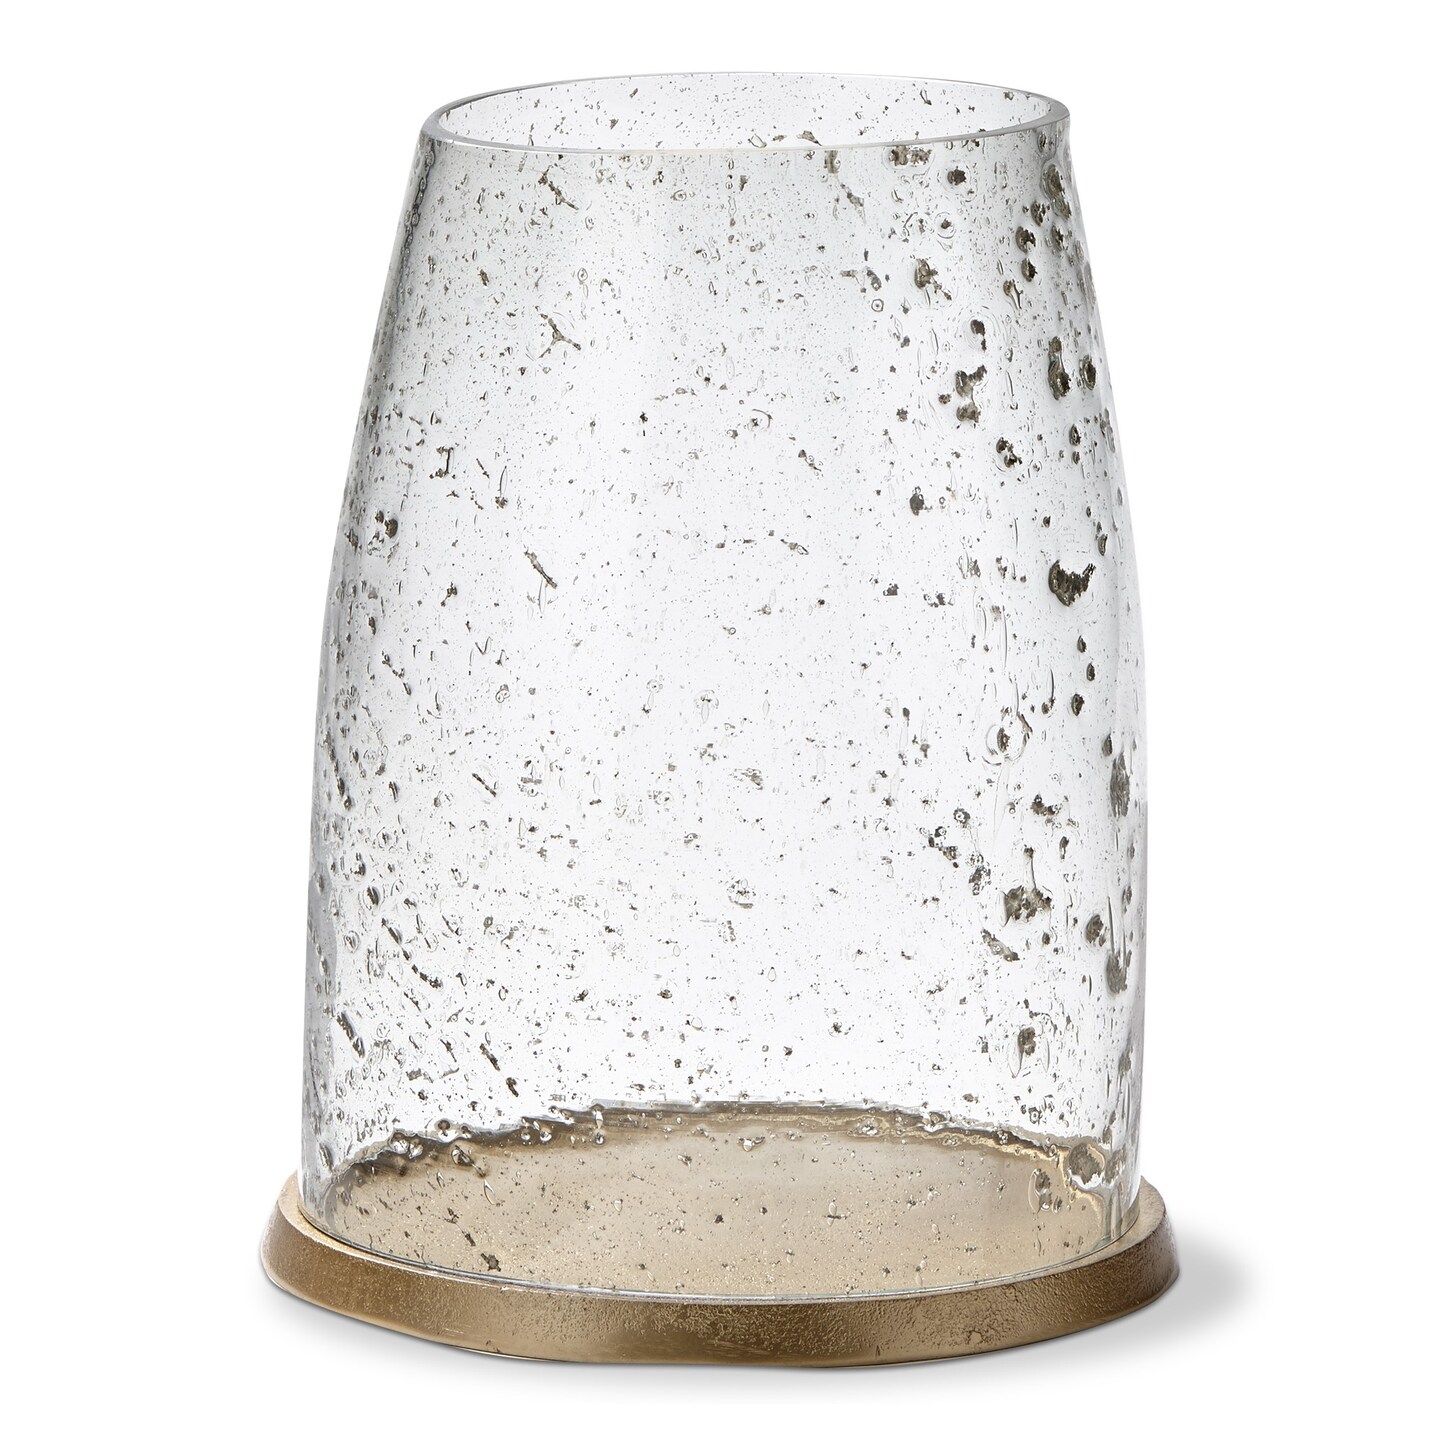 Pebble Clear Glass Hurricane Pillar Candle Holder Large, 8.0L x 8.0W x 10.8H Inches